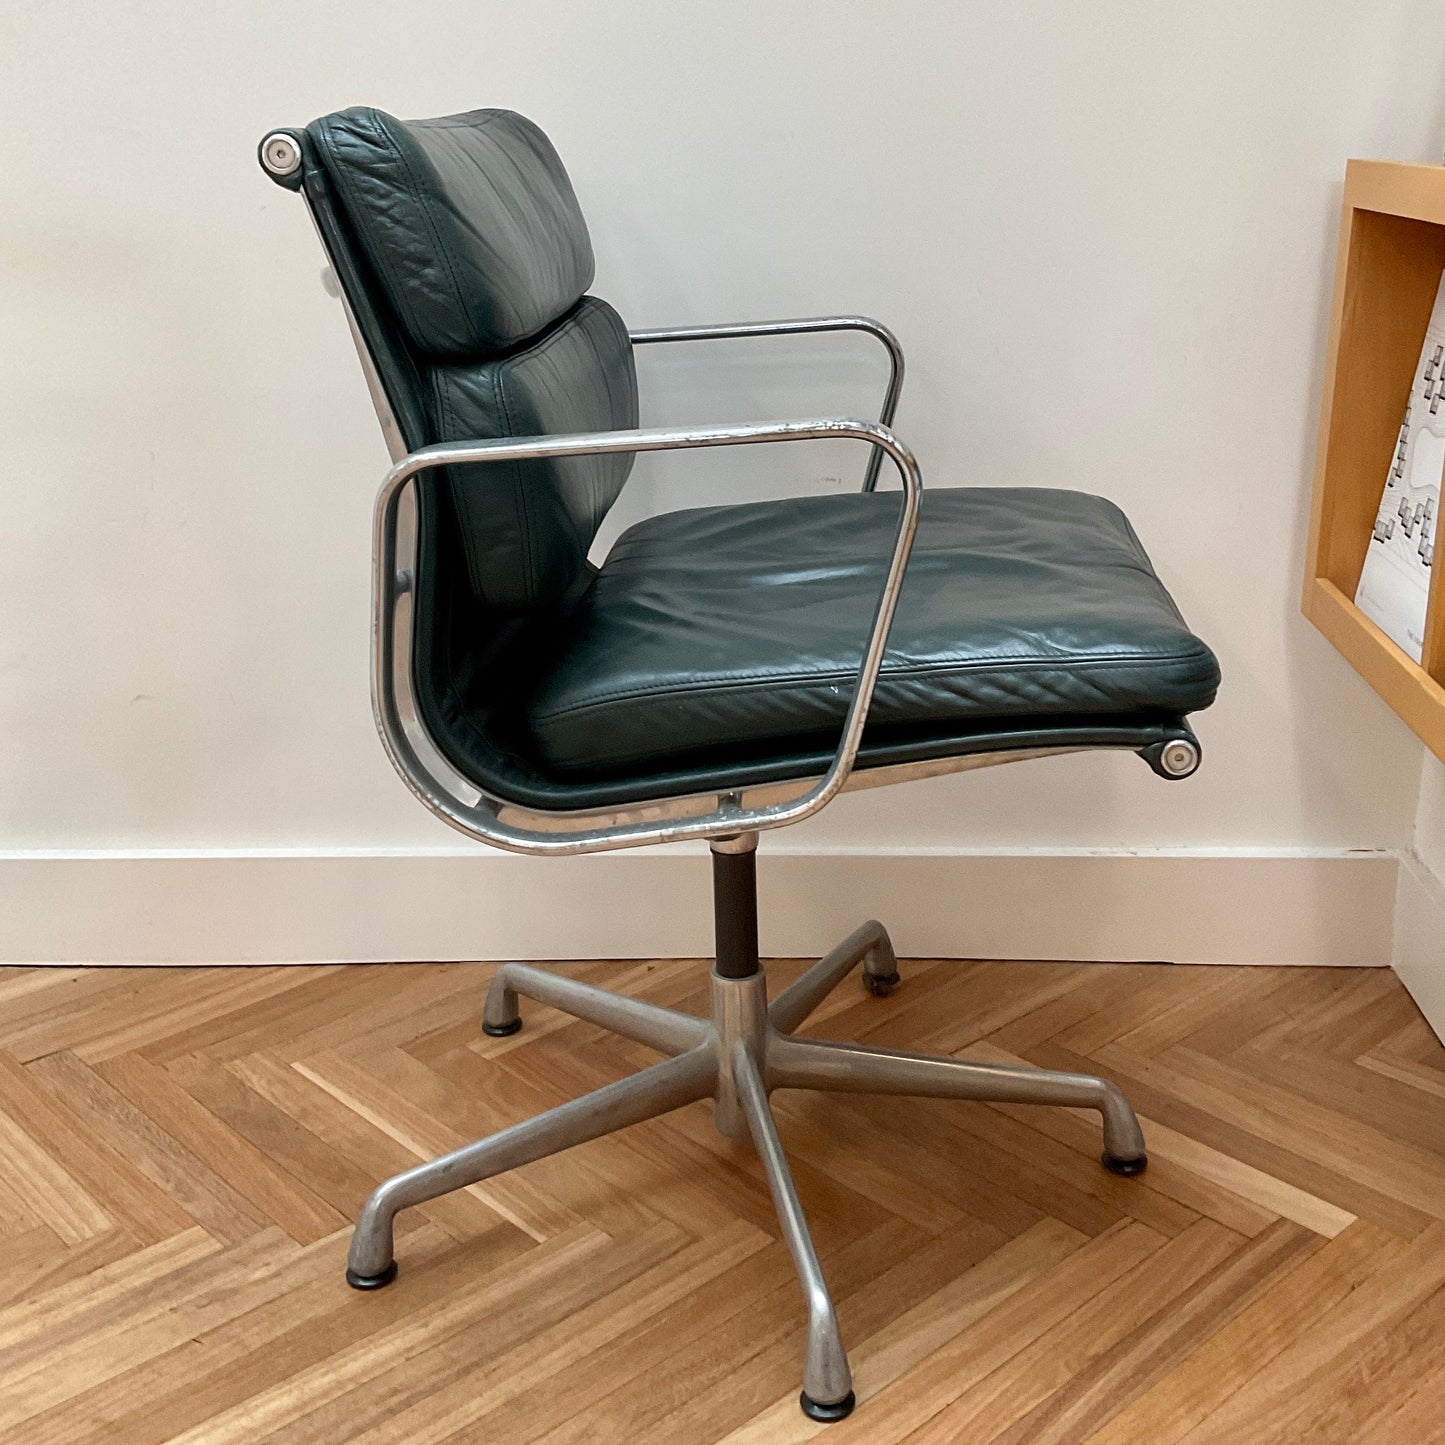 Load image into Gallery viewer, Vintage Eames Soft Pad Chair by Herman Miller (2 available)
